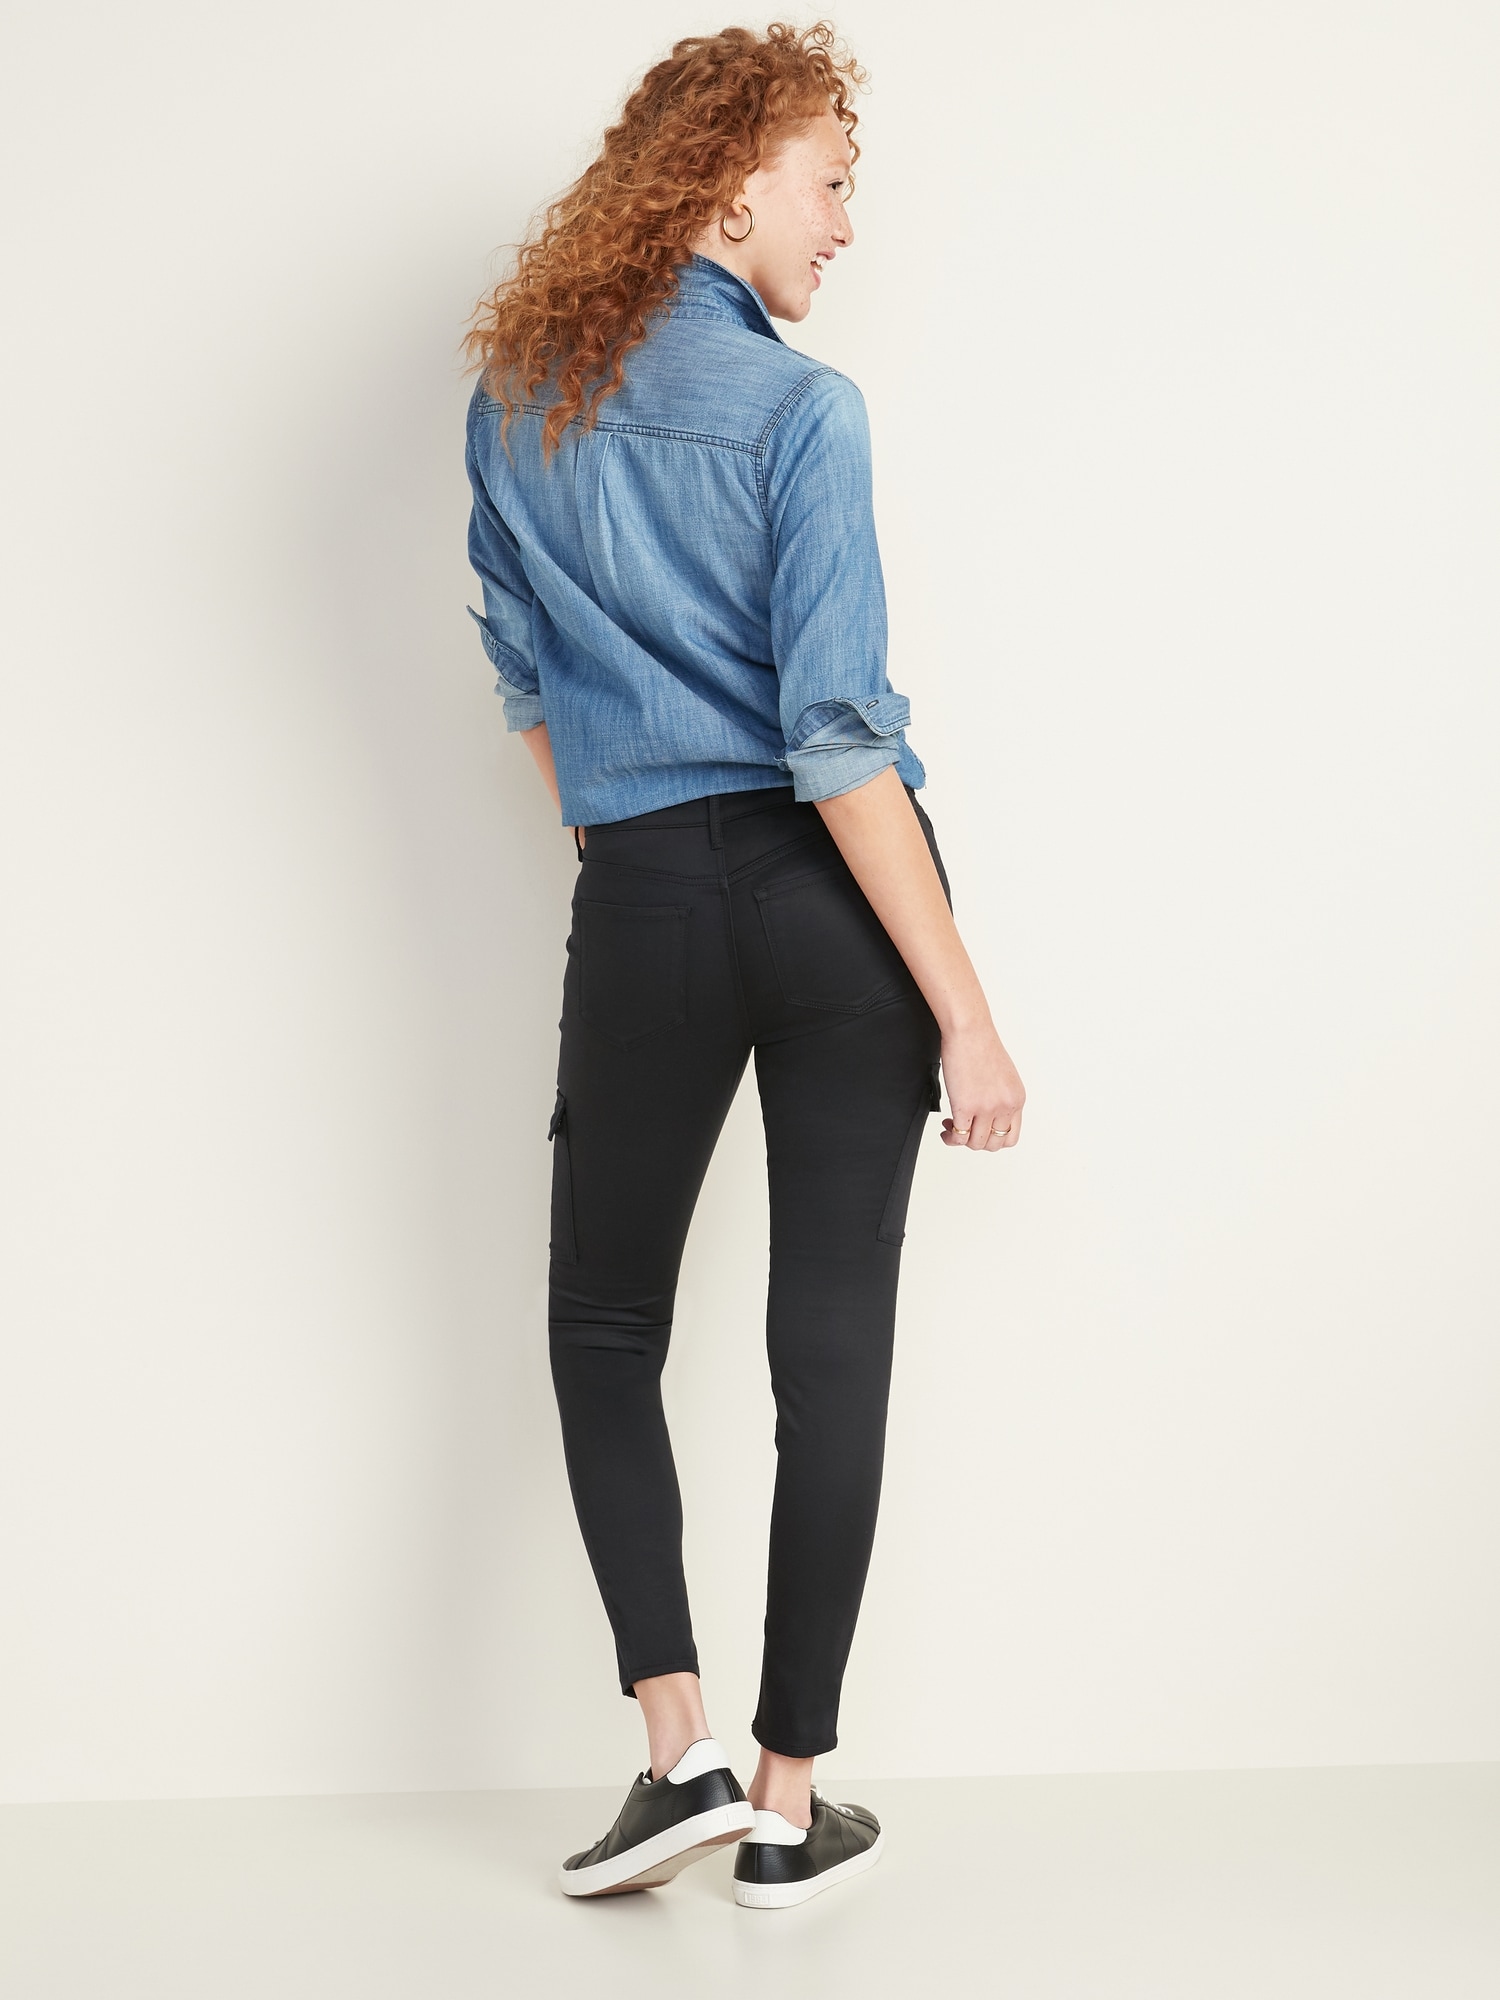 old navy sateen jeans